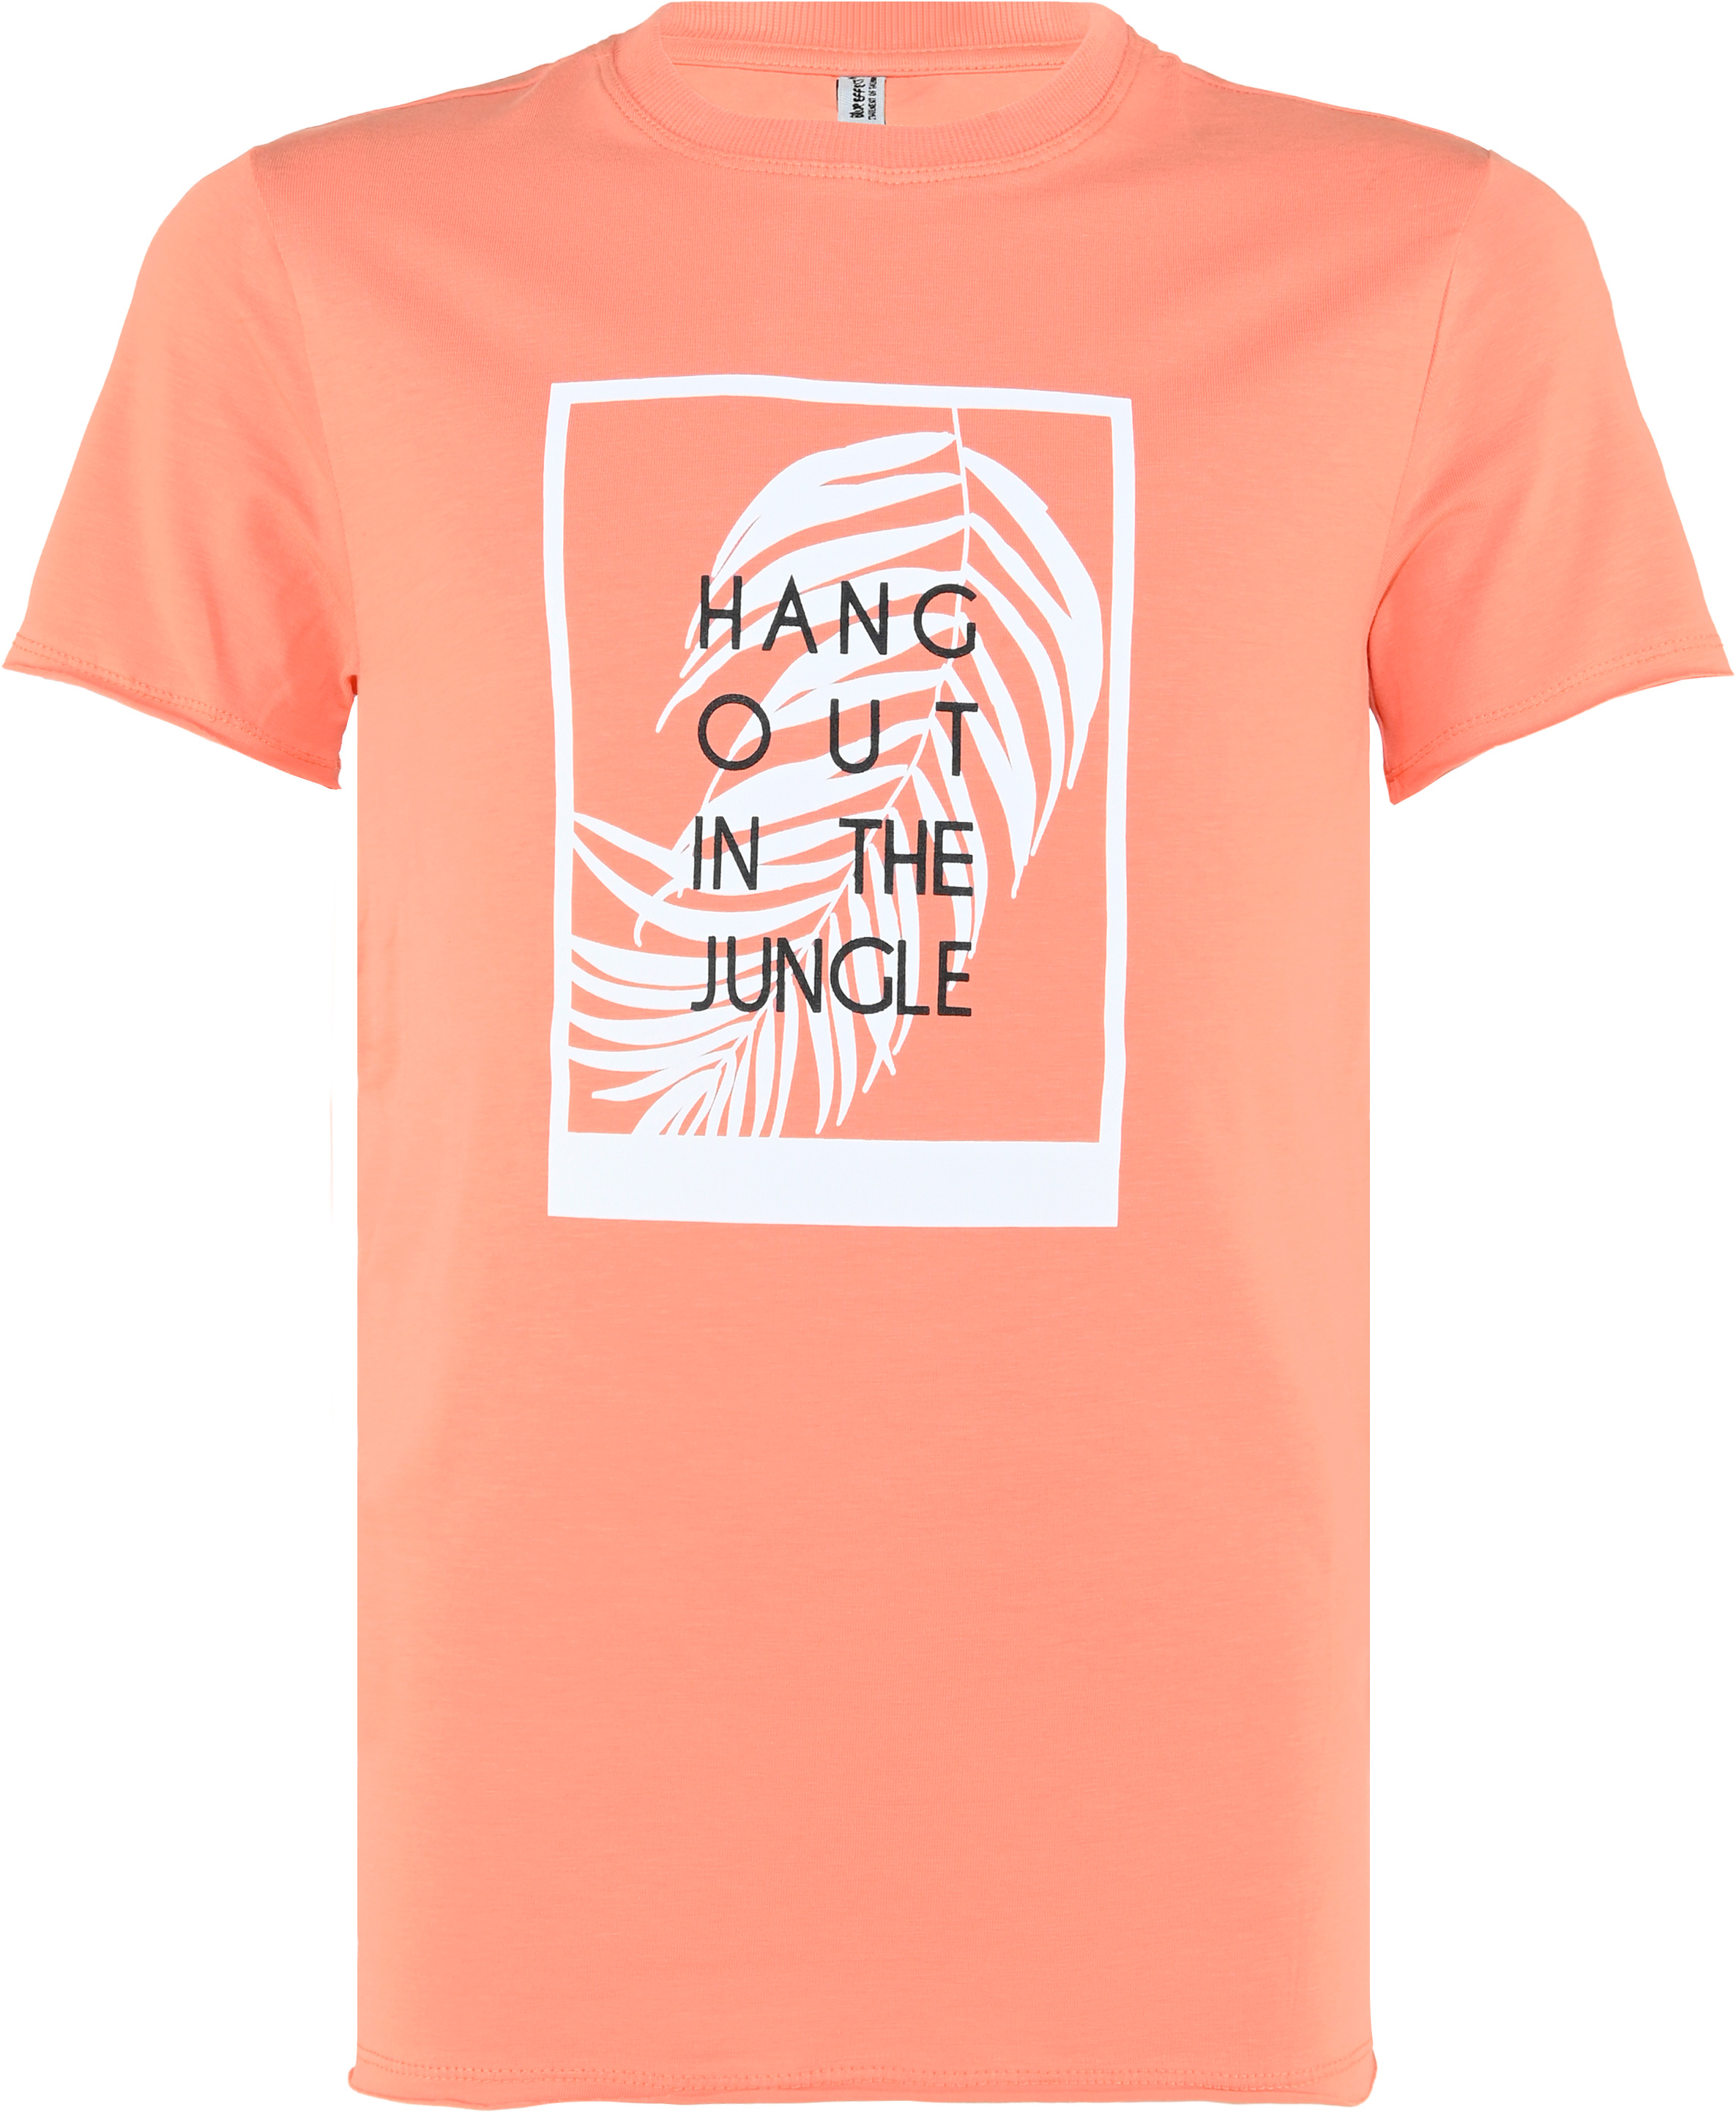 6203-Boys T-Shirt -Hang out in the Jungle